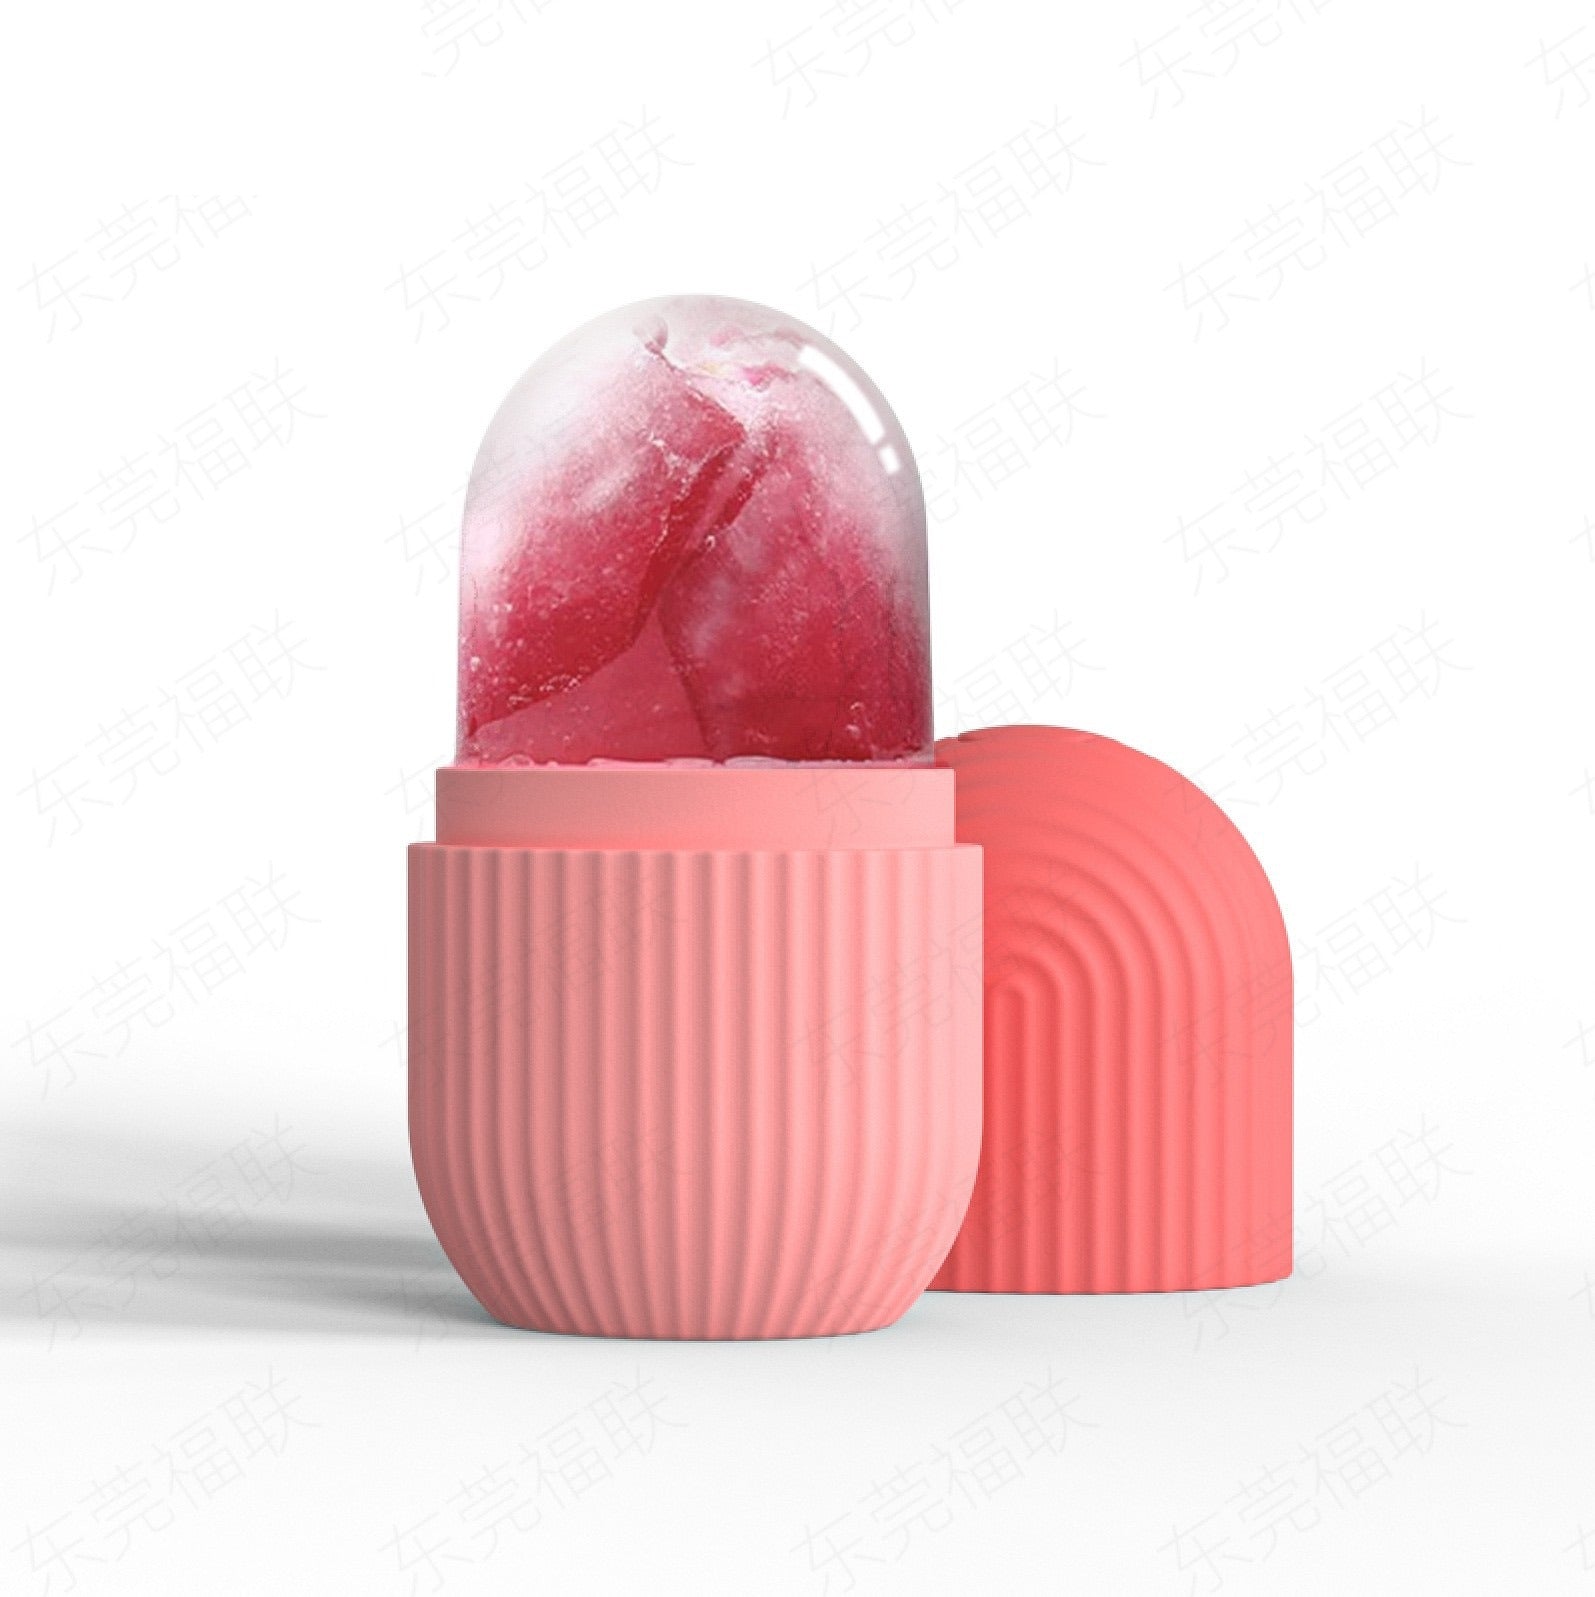 Silicone Ice Roller Massager in pink color